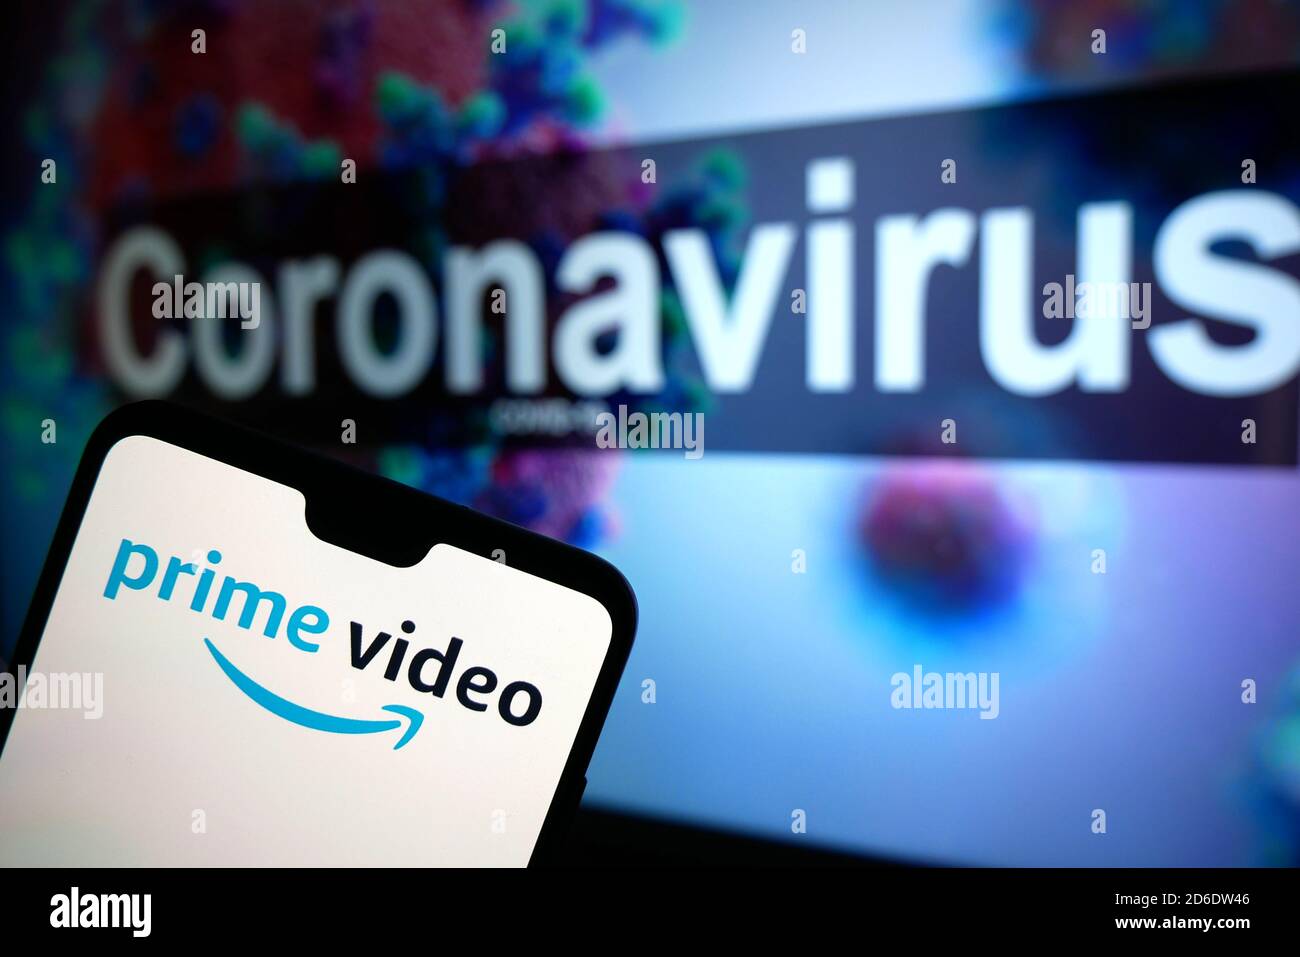 The Amazon Prime Video logo seen displayed on a mobile phone with an illustrative model of the Coronavirus displayed on a monitor in the background. Stock Photo